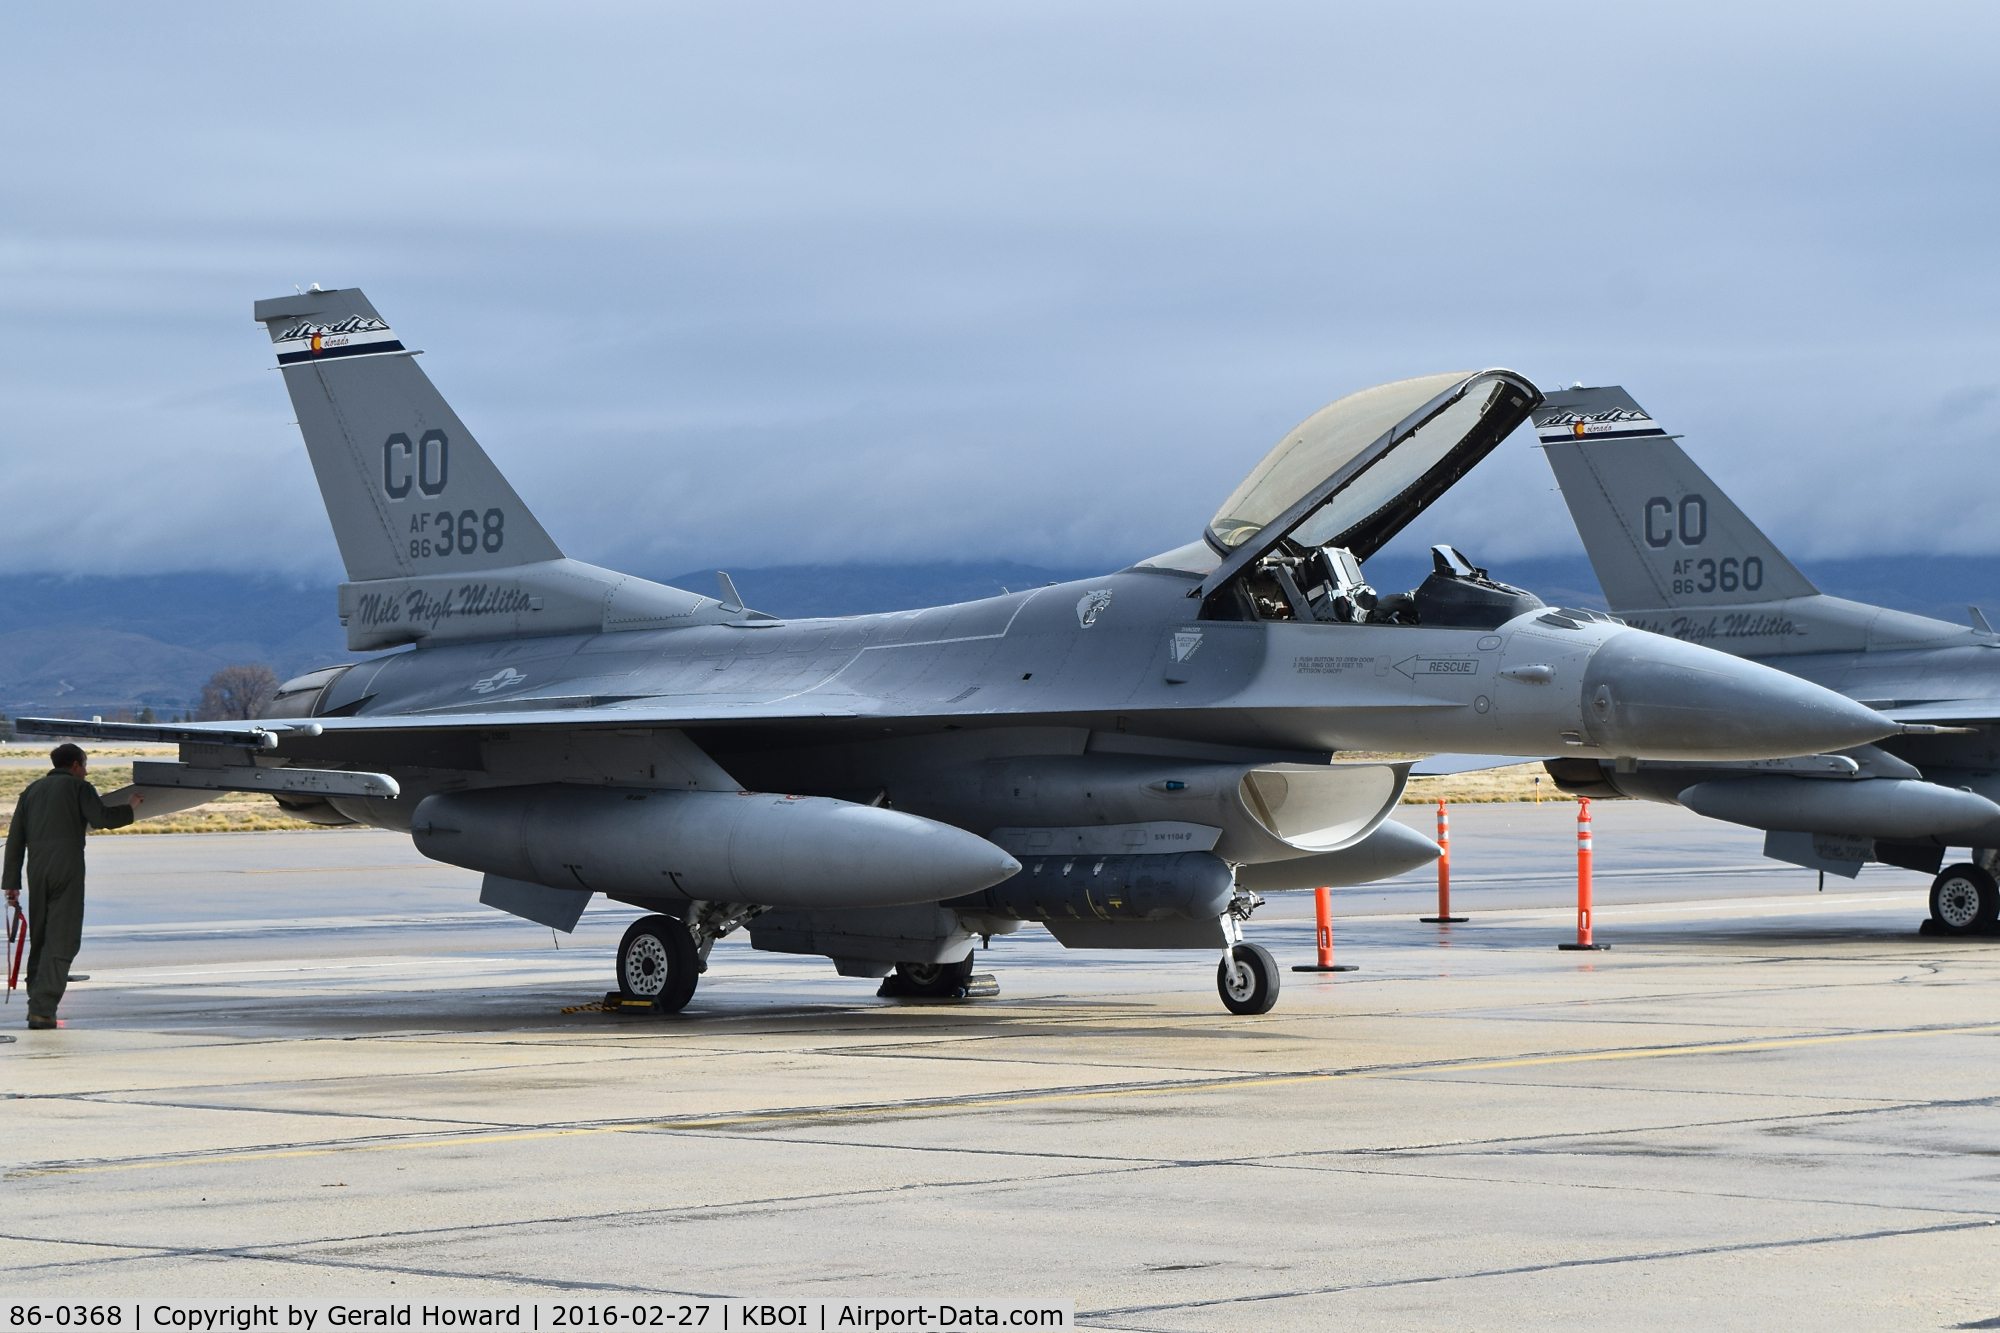 86-0368, 1986 General Dynamics F-16C Fighting Falcon C/N 5C-474, 120th Fighter Sq., “Mile High Militia”, 140th Wing, Colorado ANG.